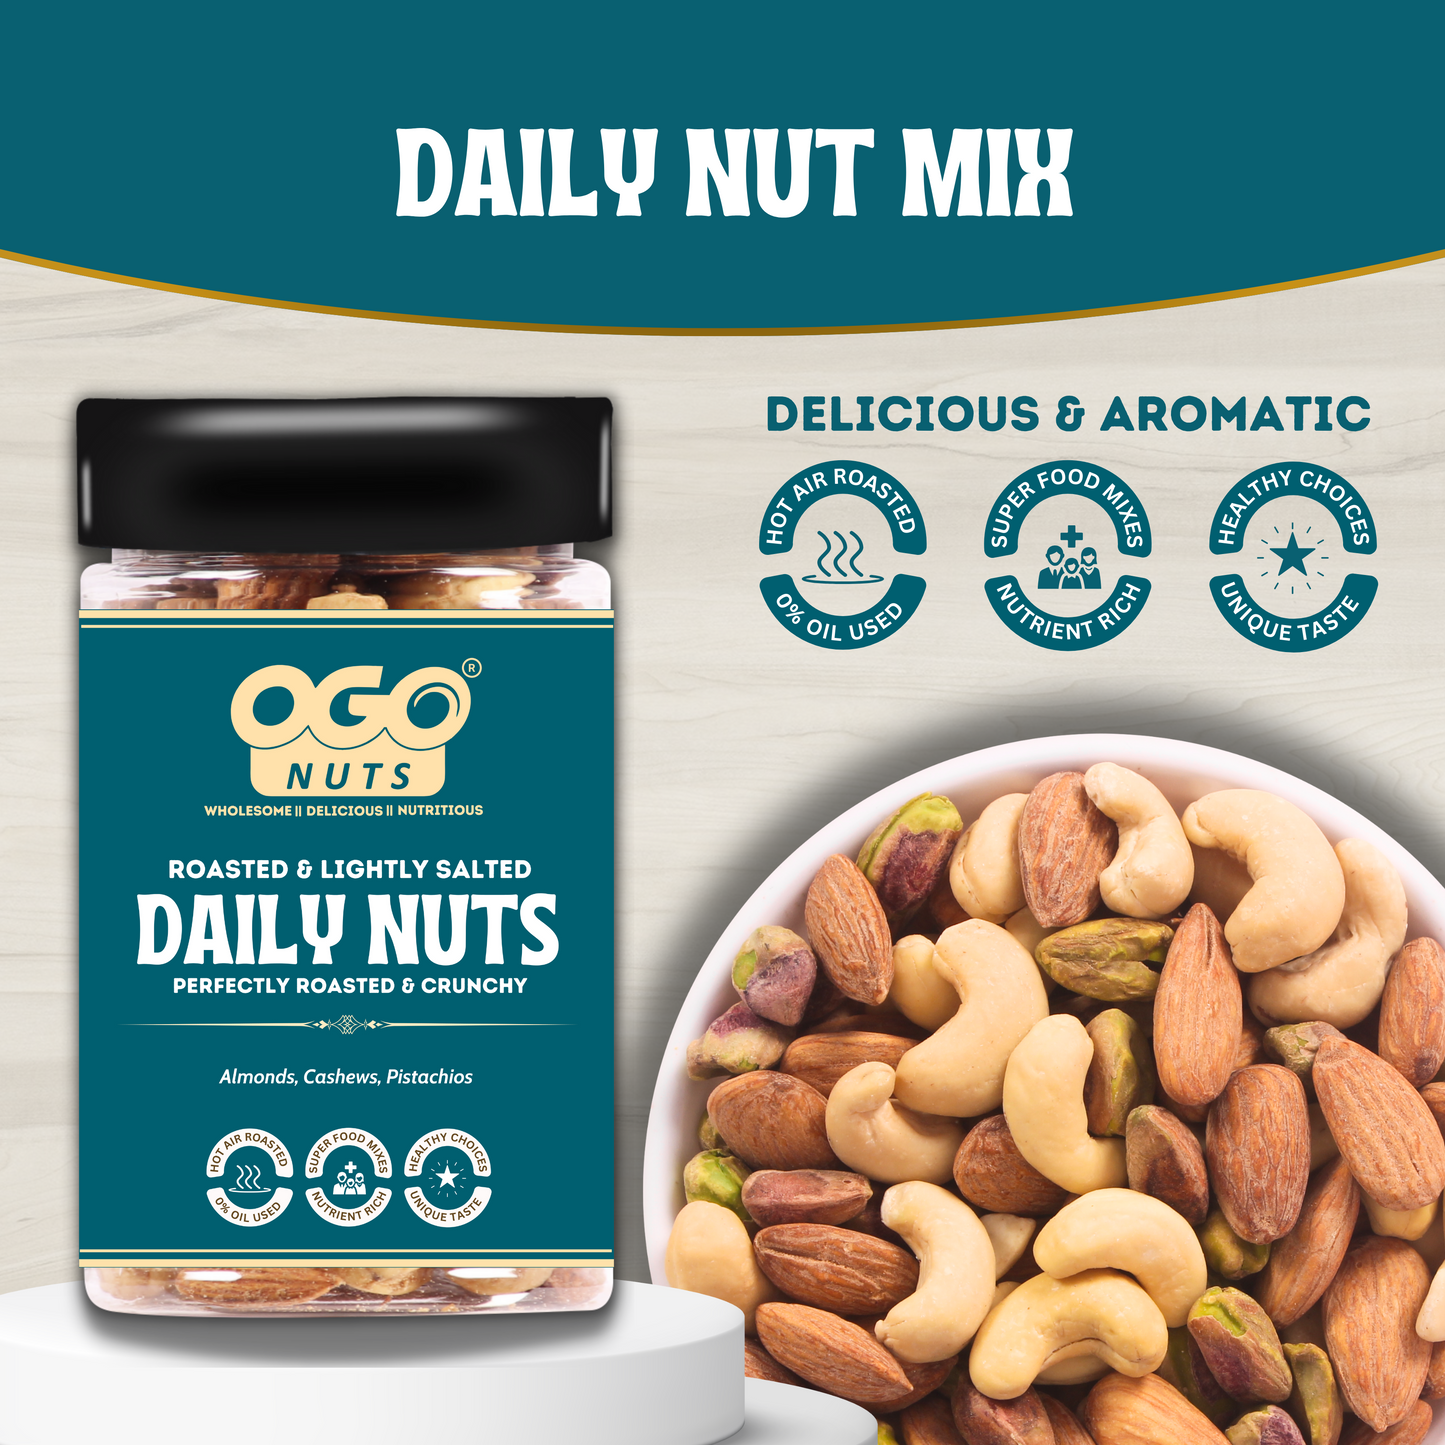 Daily Nuts Mix